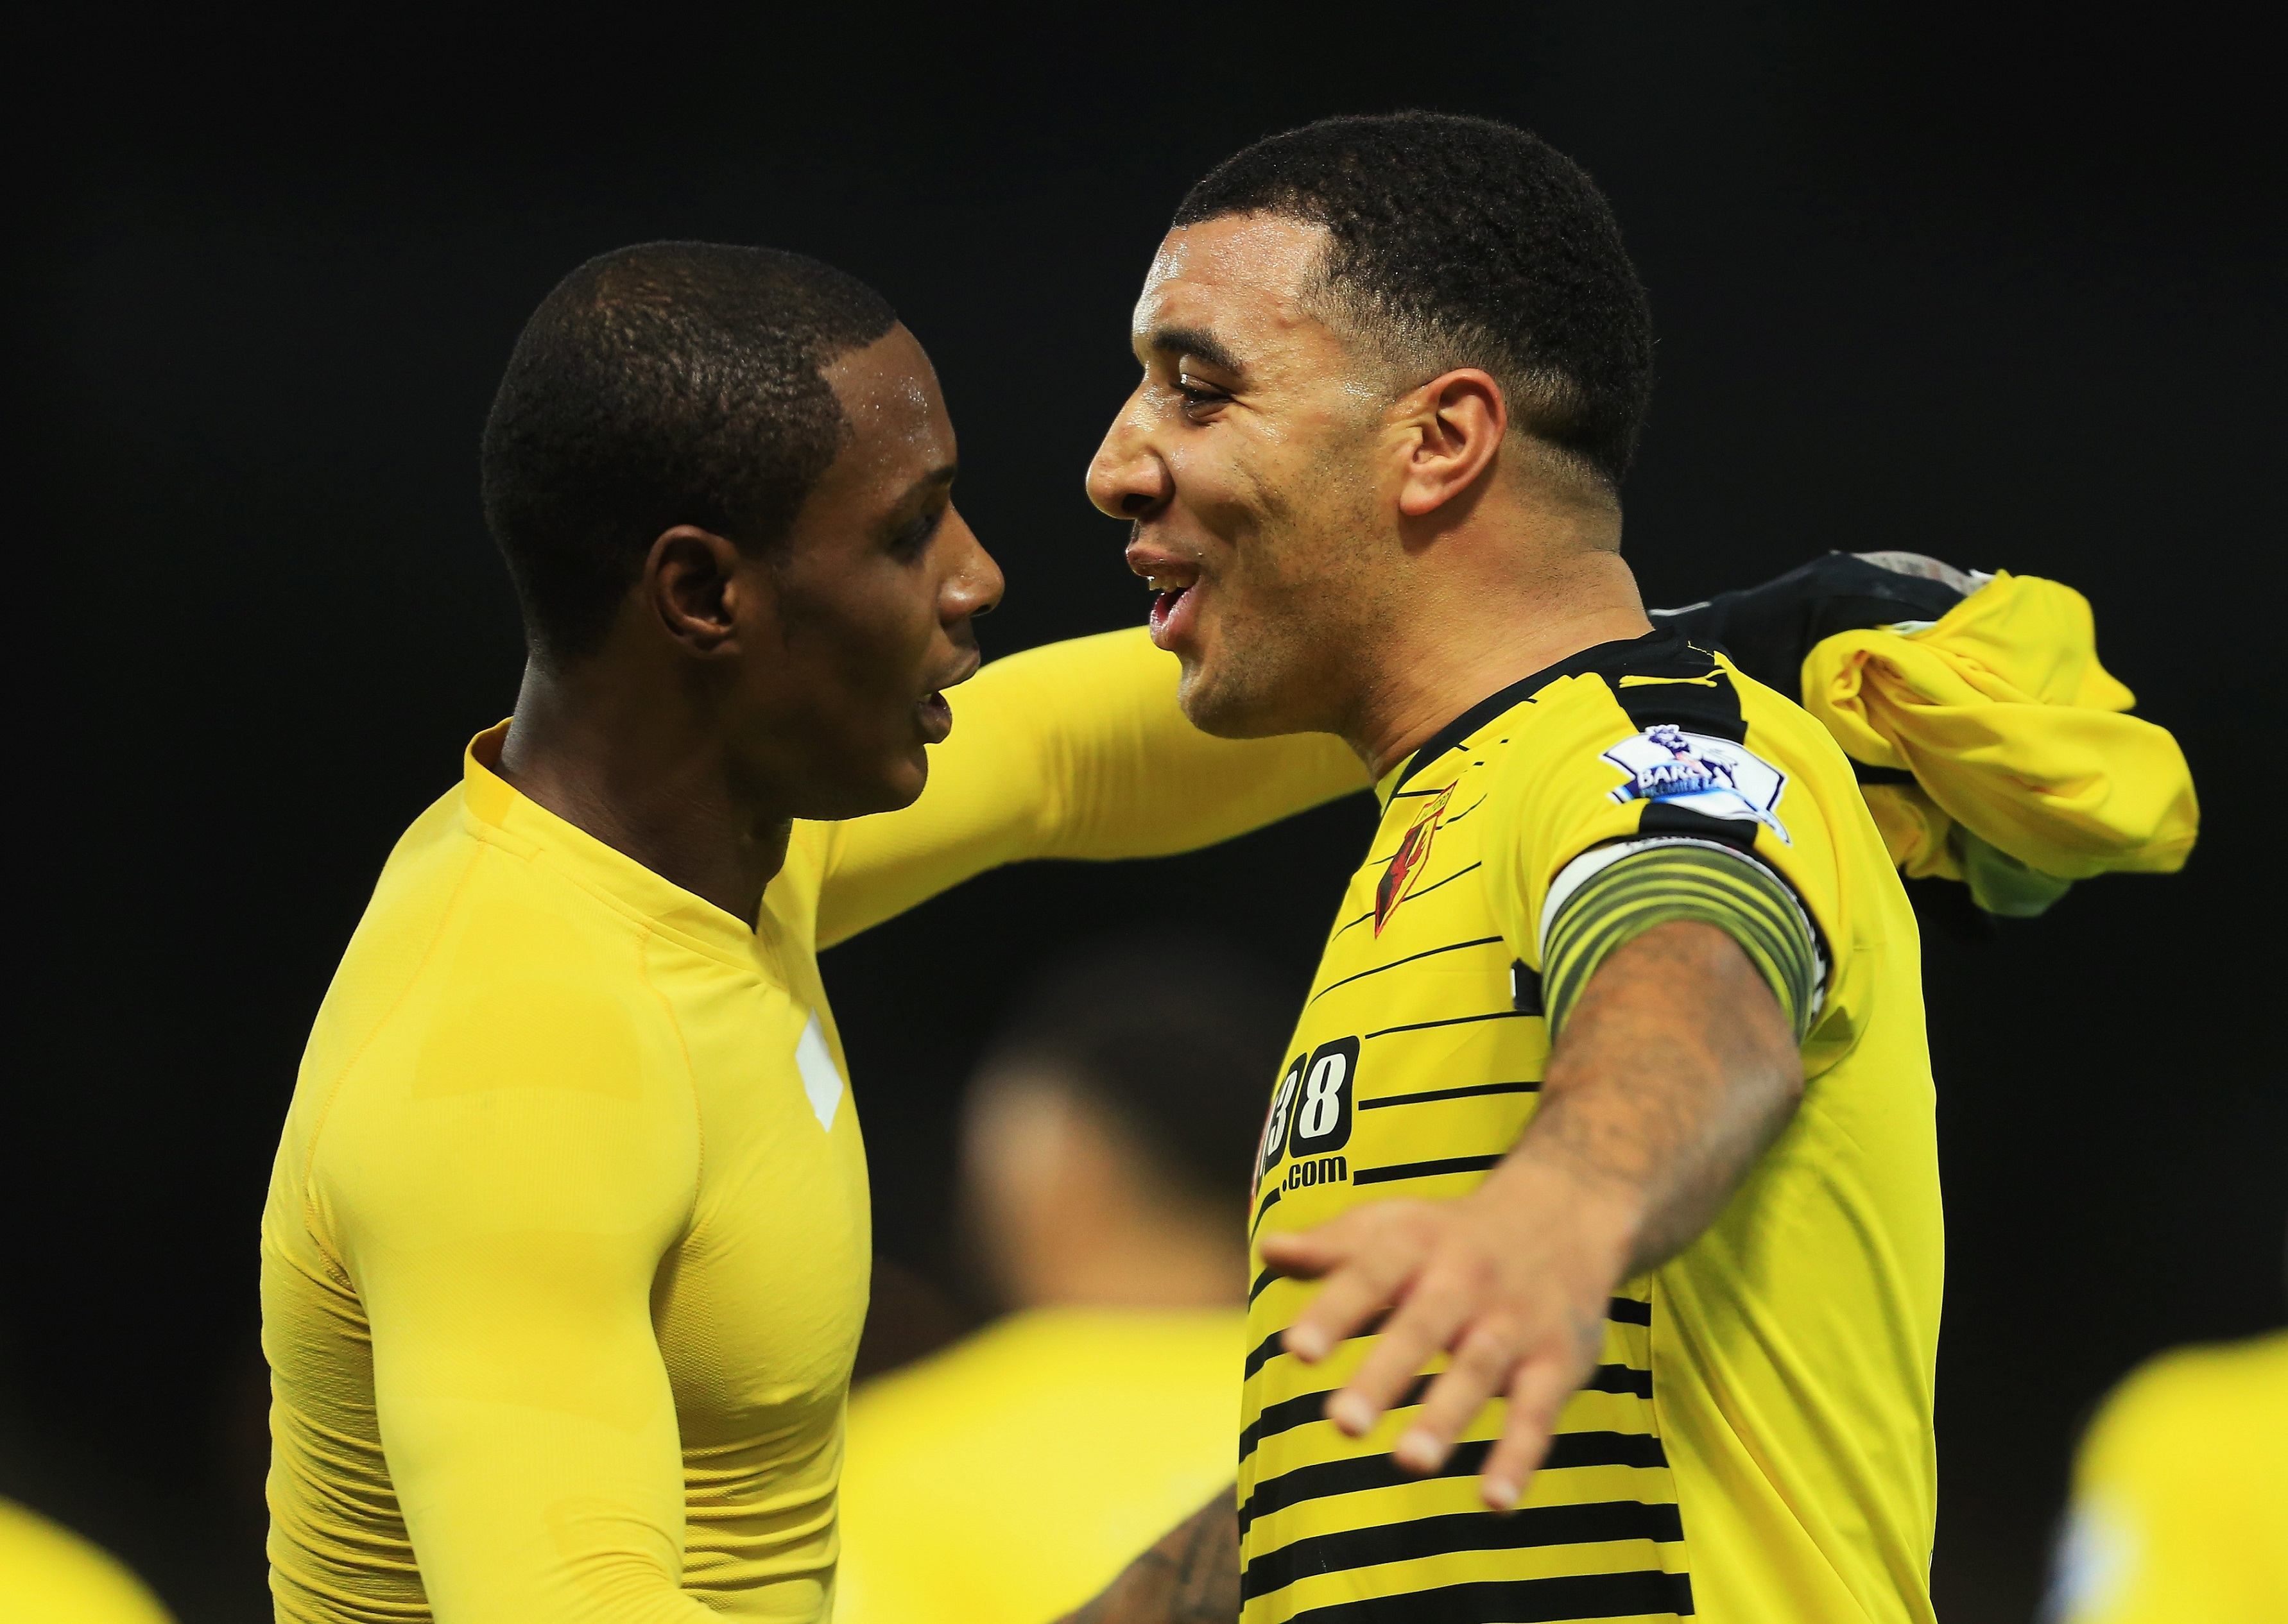 during the Barclays Premier League match between Watford and Norwich City at Vicarage Road on December 5, 2015 in Watford, England.